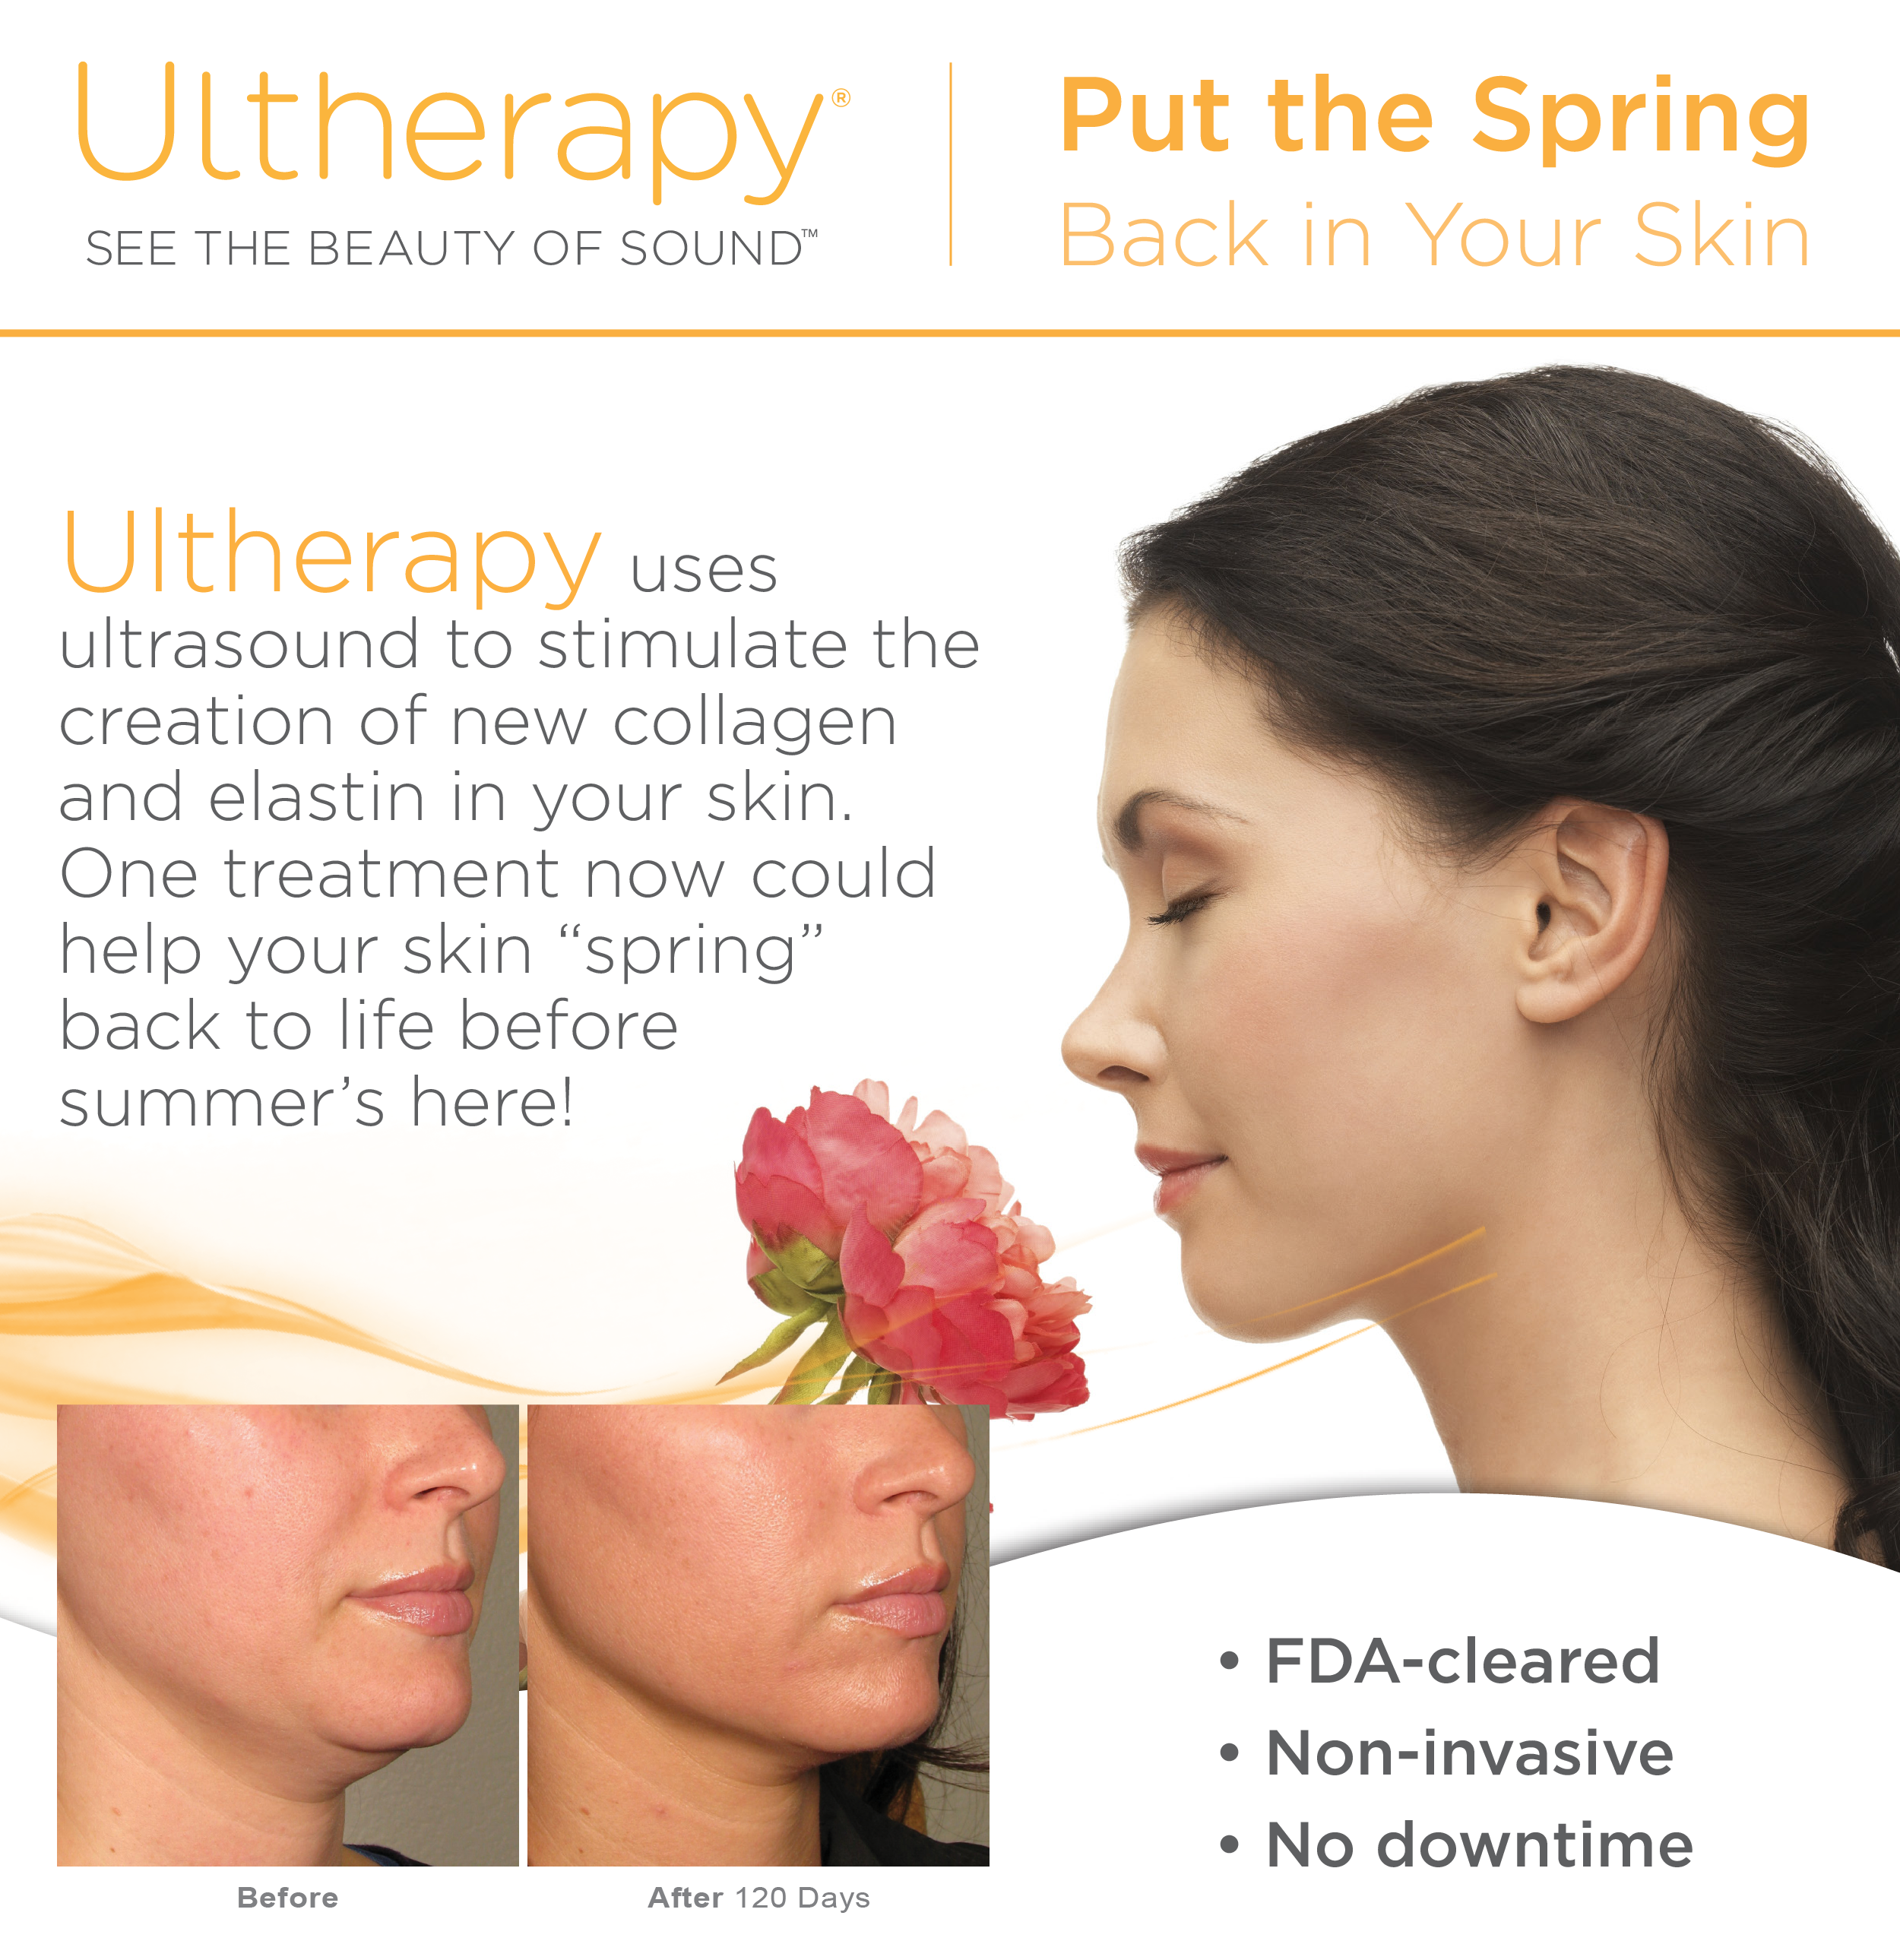 Are You Ready to Look Younger? Spring Savings on Ultherapy